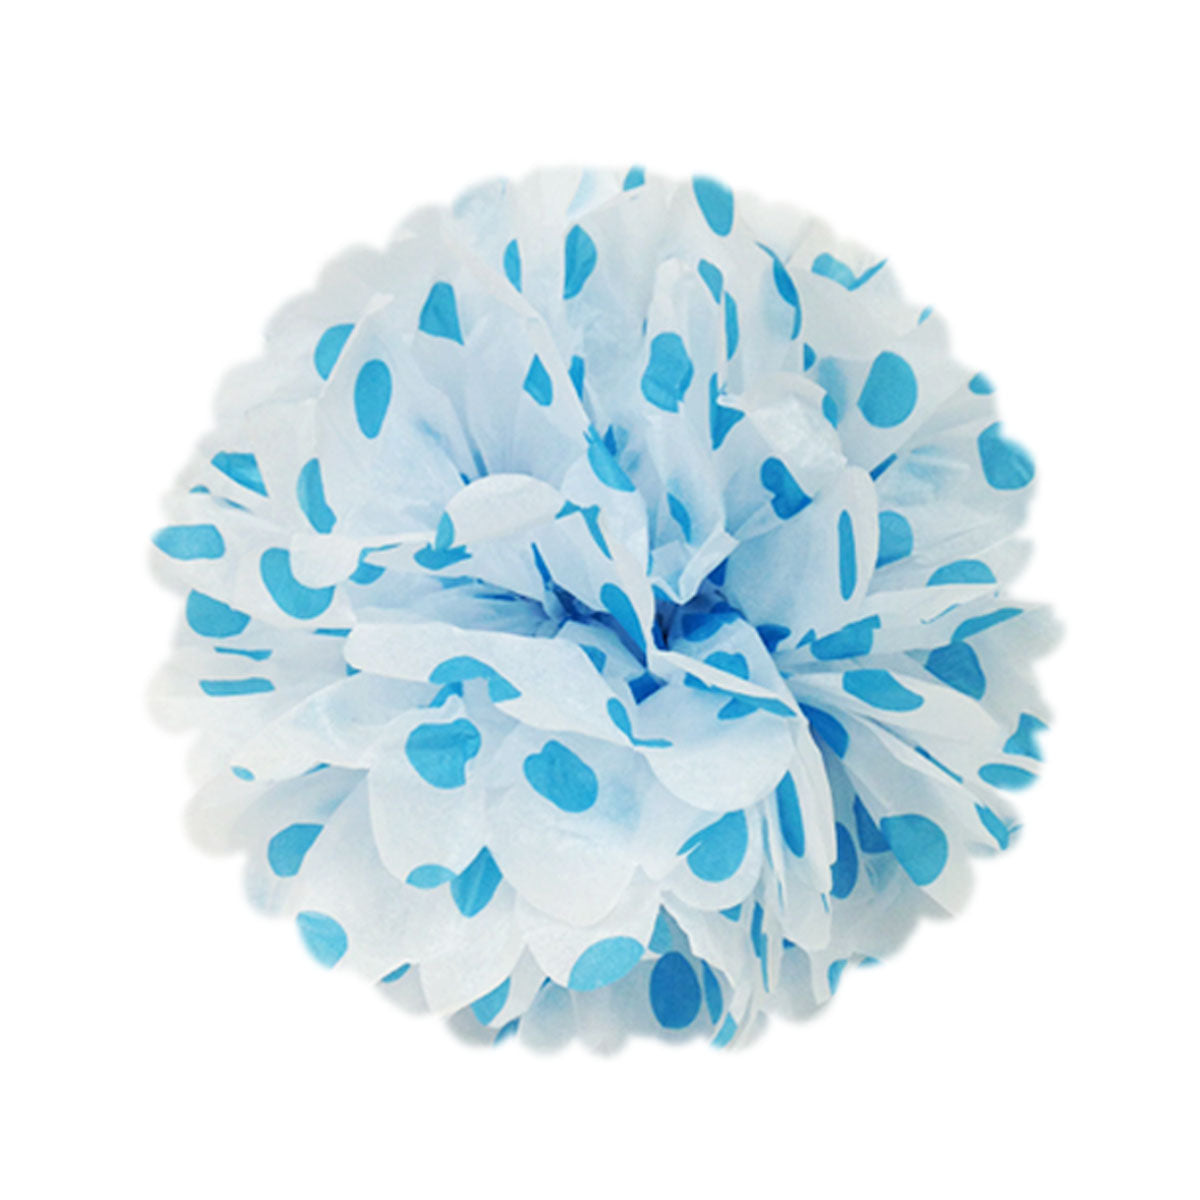 Wrapables Tissue Pom Poms Party Decorations for Weddings, Birthday Parties and Baby Showers, 8-inch, Blue Polka Dots, Set of 5